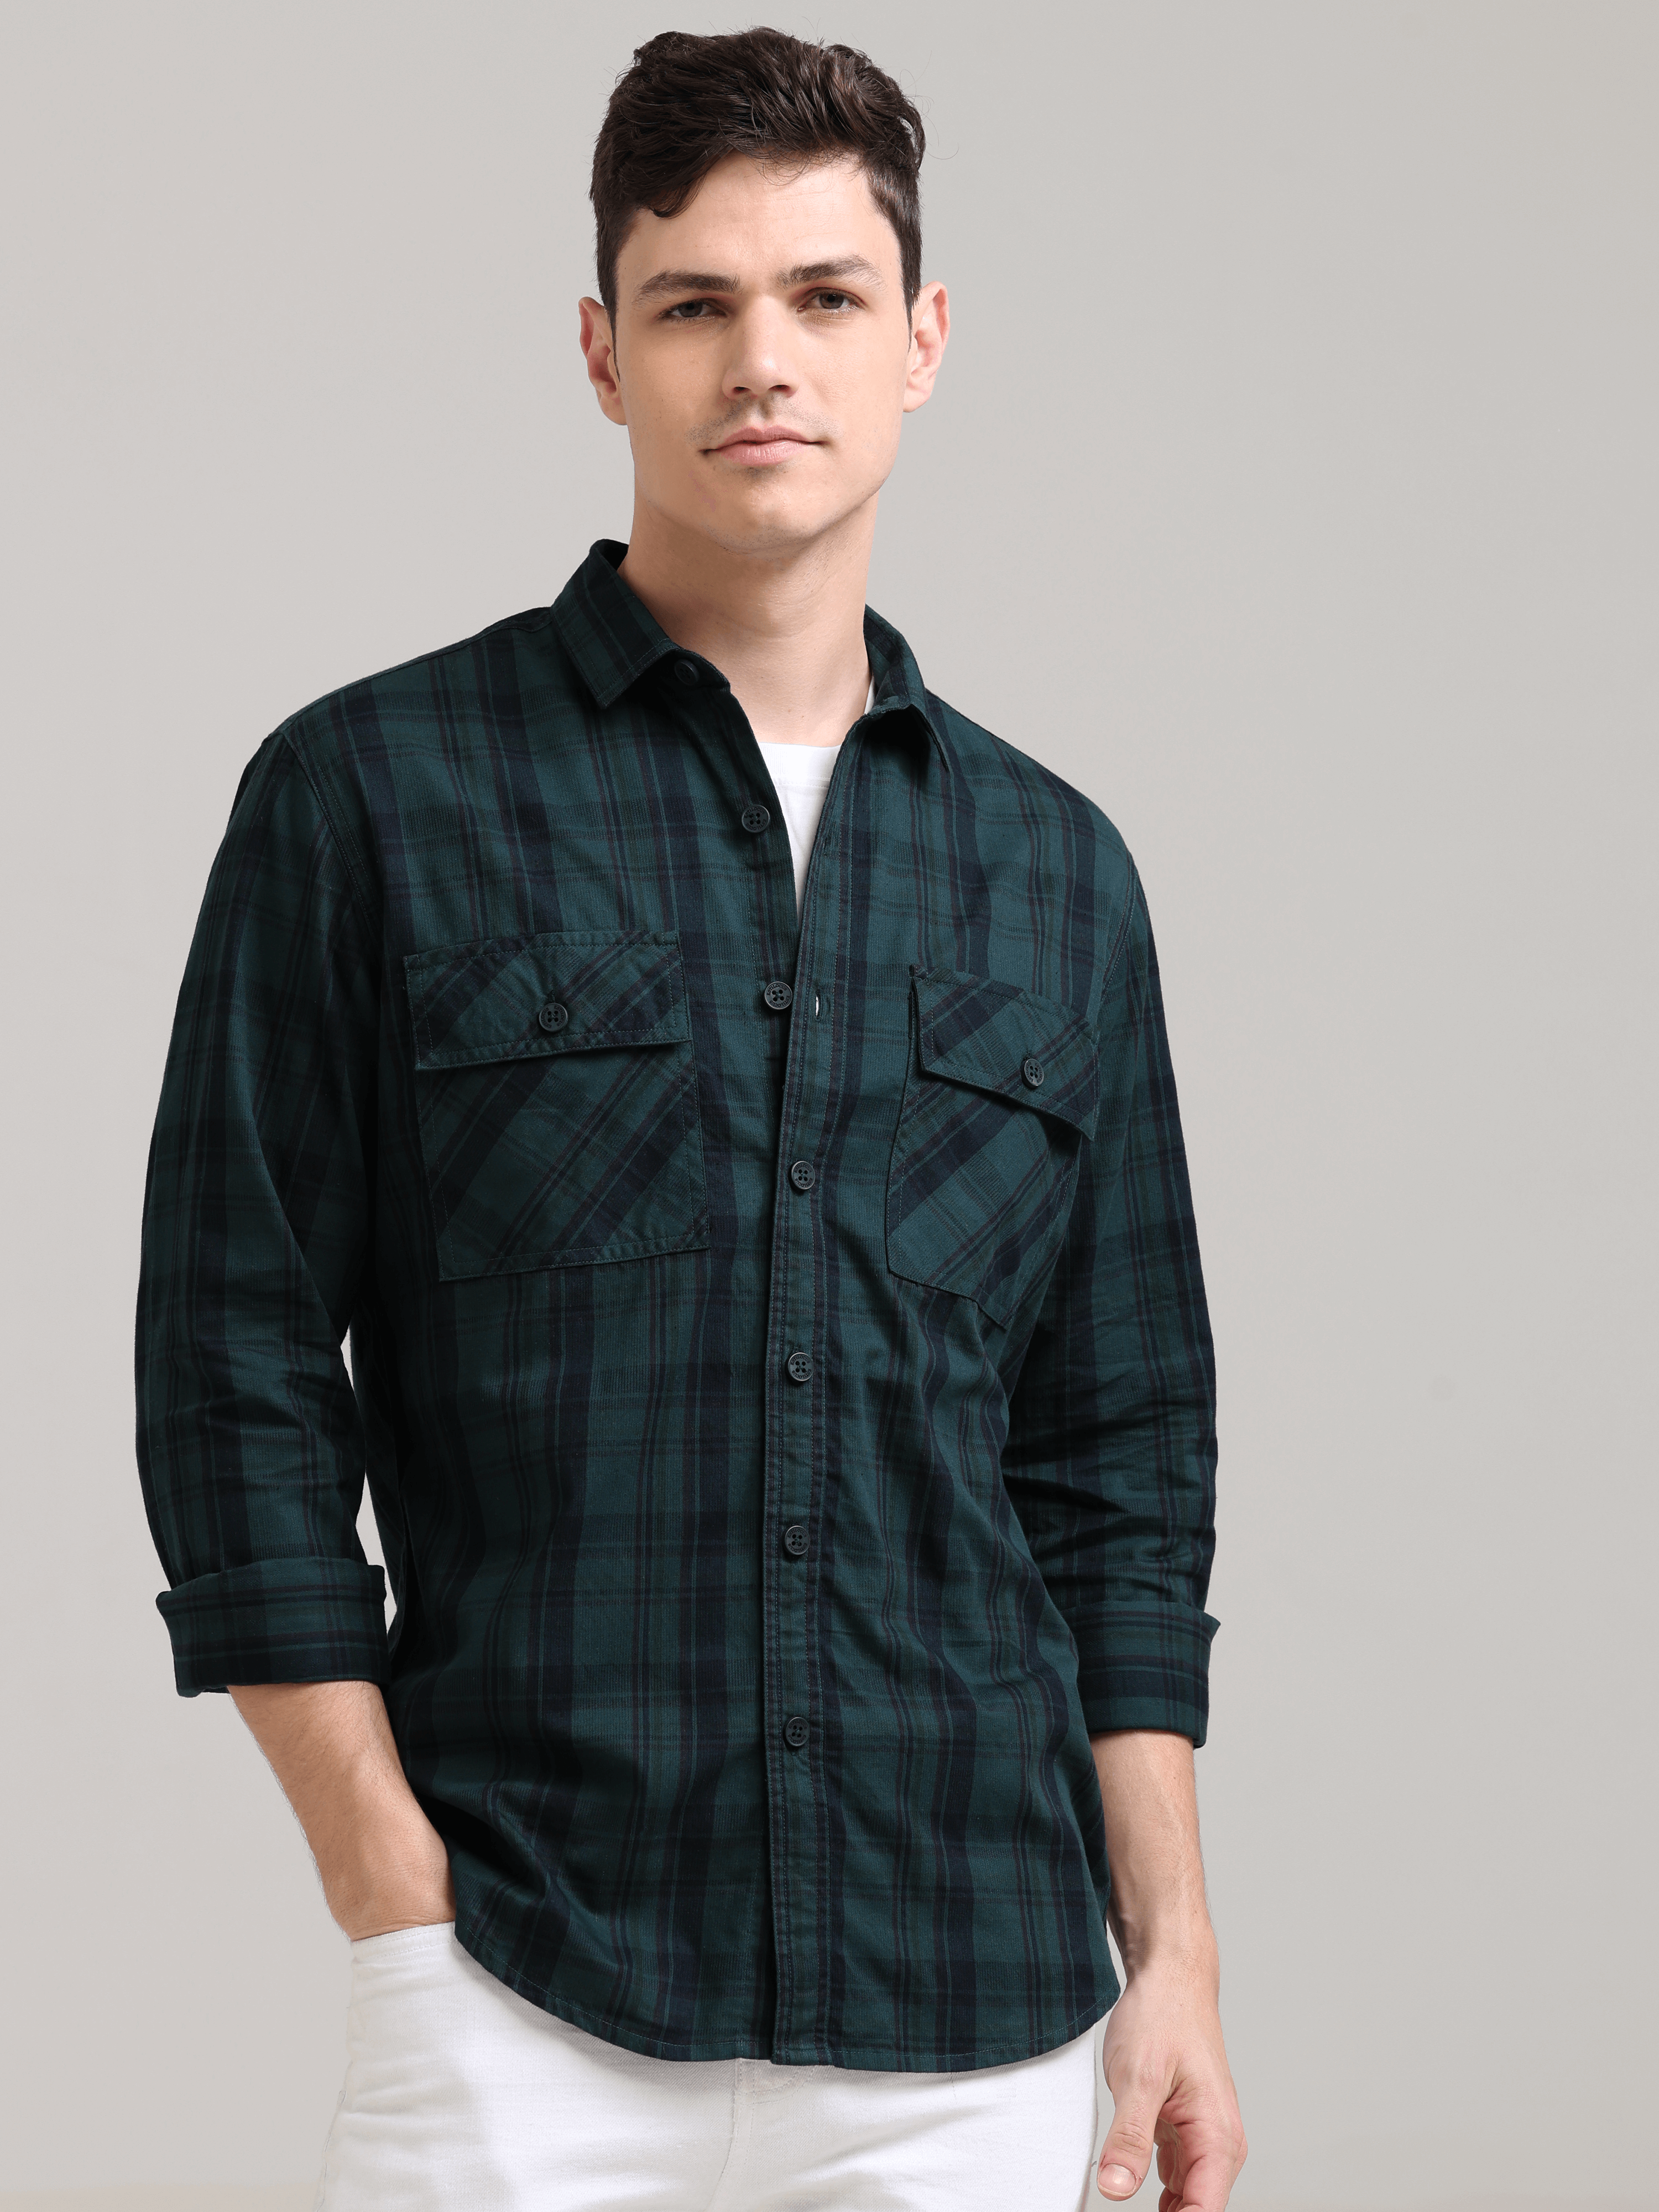 Dusky Green Semi Corduroy Shirt shop online at Estilocus. 100% Cotton • Full-sleeve check shirt• Cut and sew placket• Regular collar• Double button edge cuff• Double pocket with flap• Curved bottom hemline .• All double needle construction, finest quality